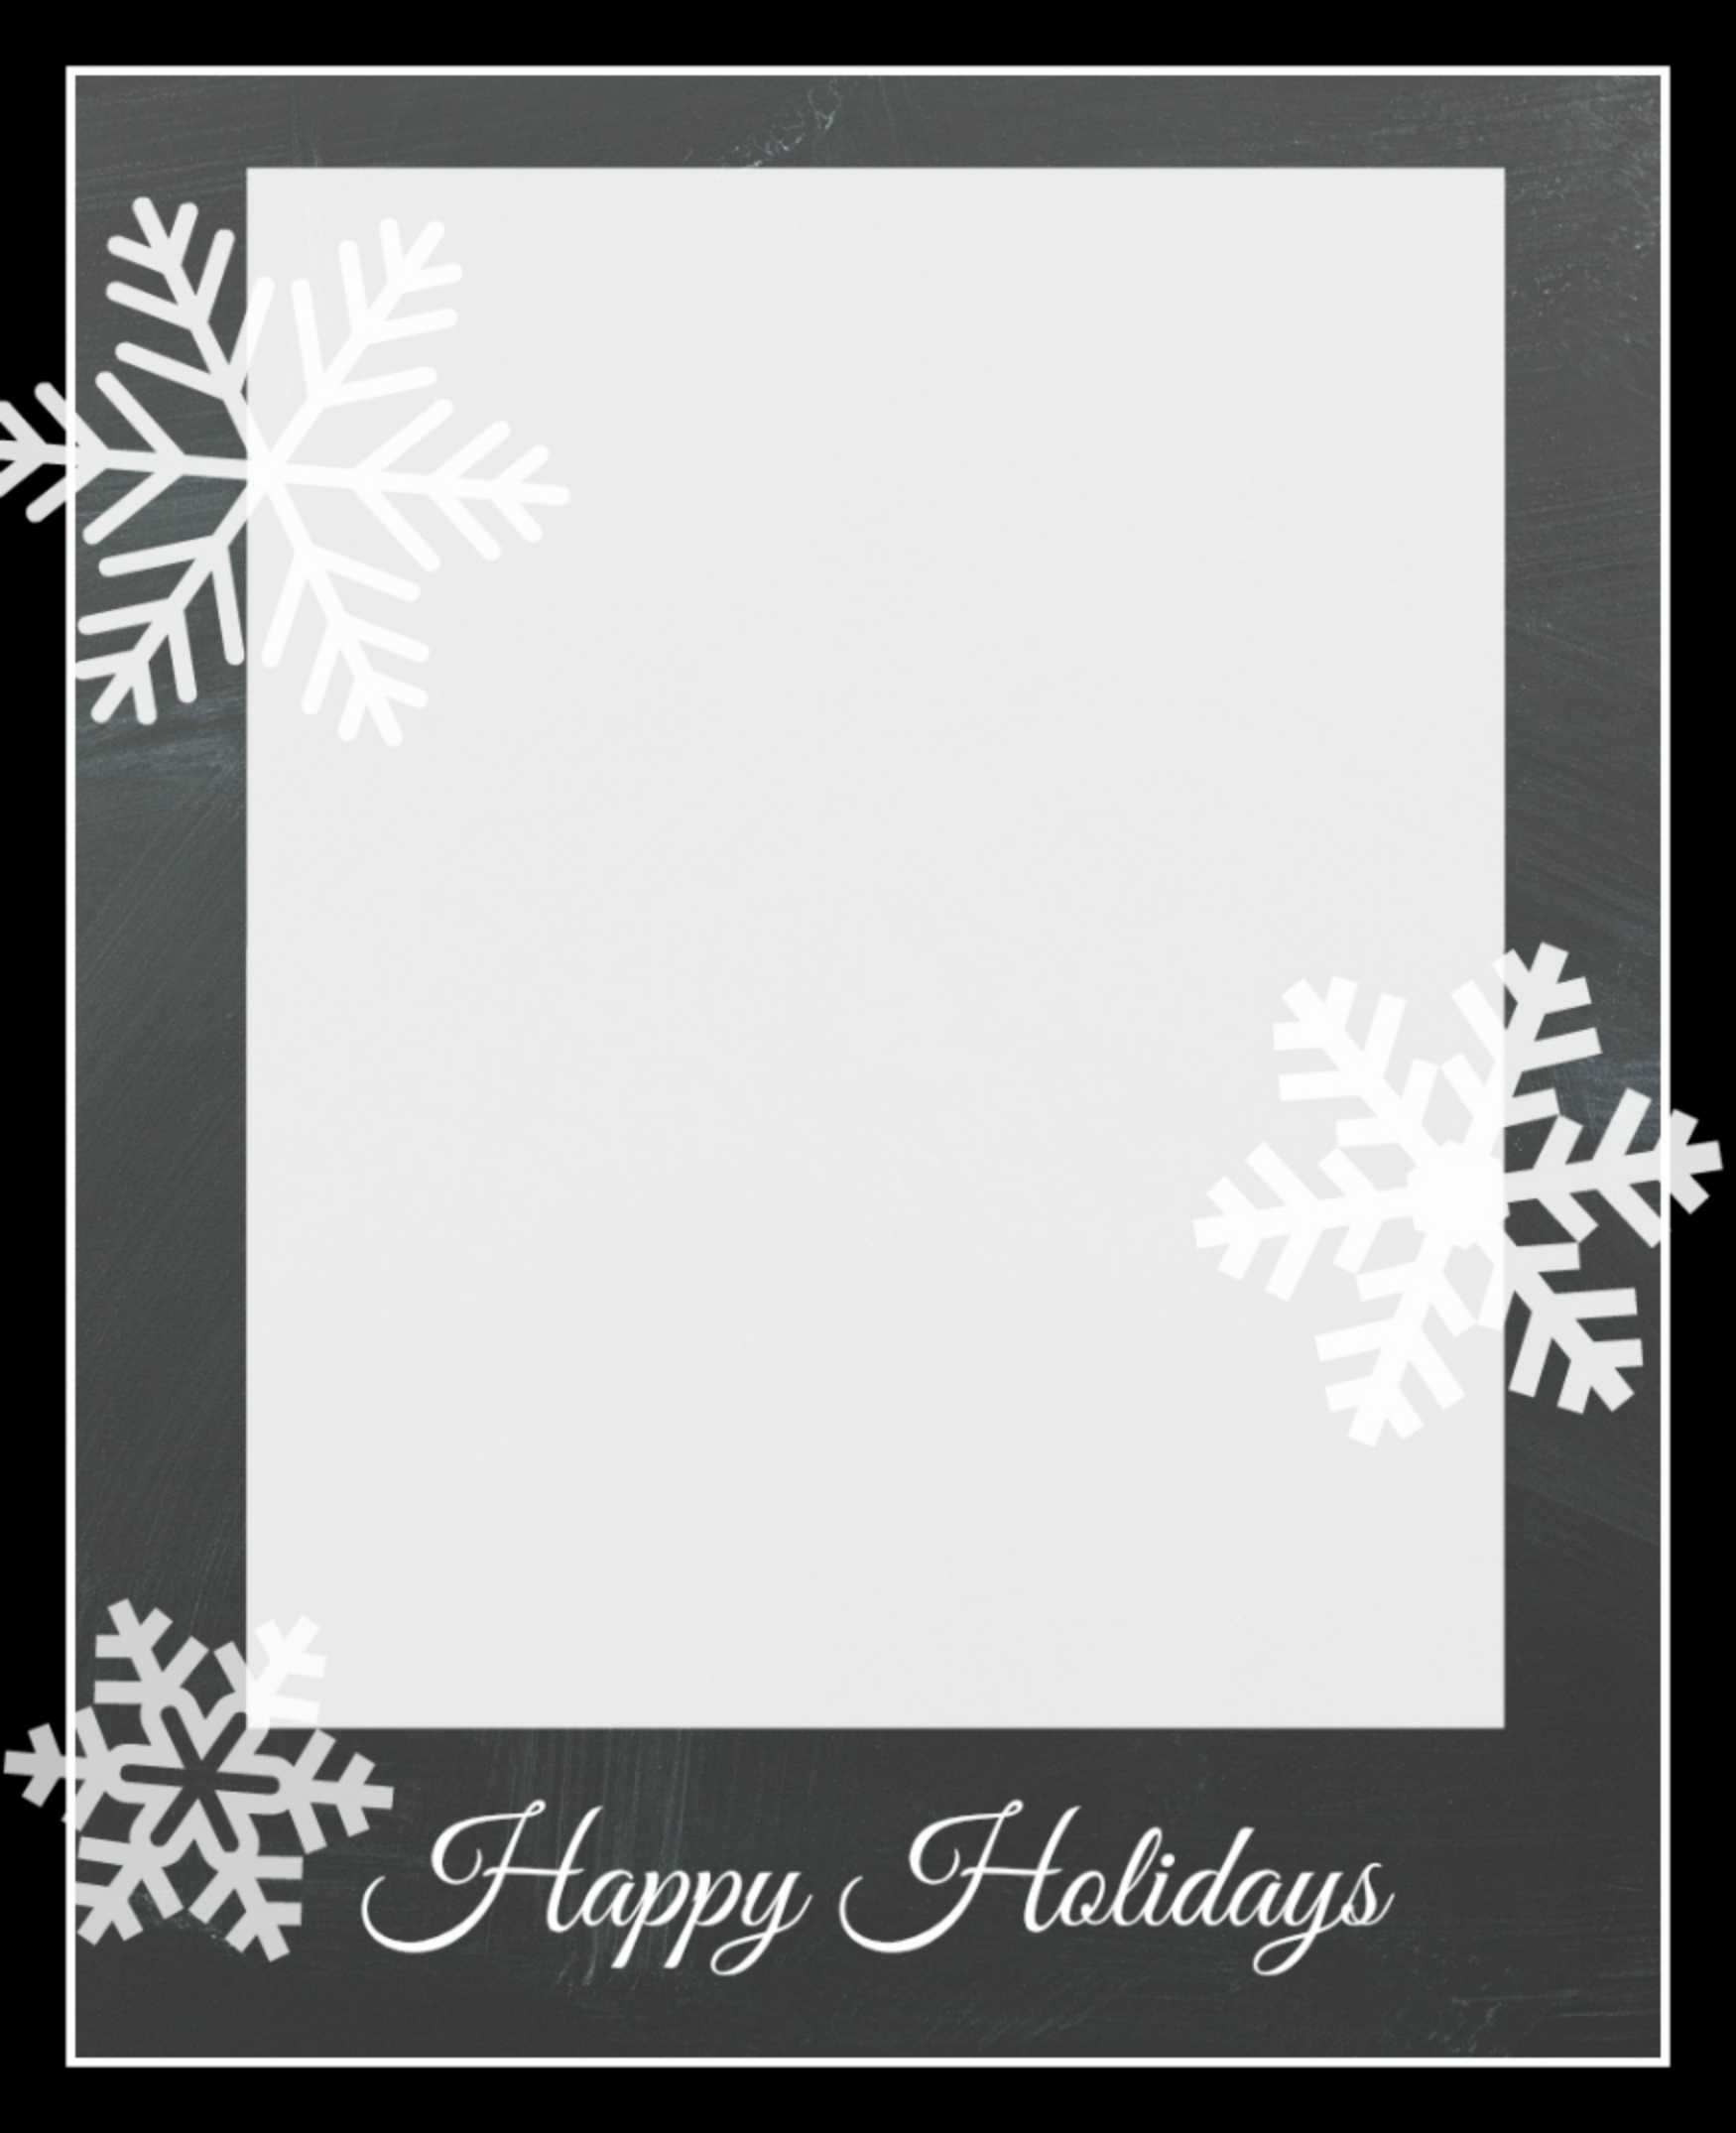 Free Picture Christmas Card Templates – Milas With Regard To Free Holiday Photo Card Templates